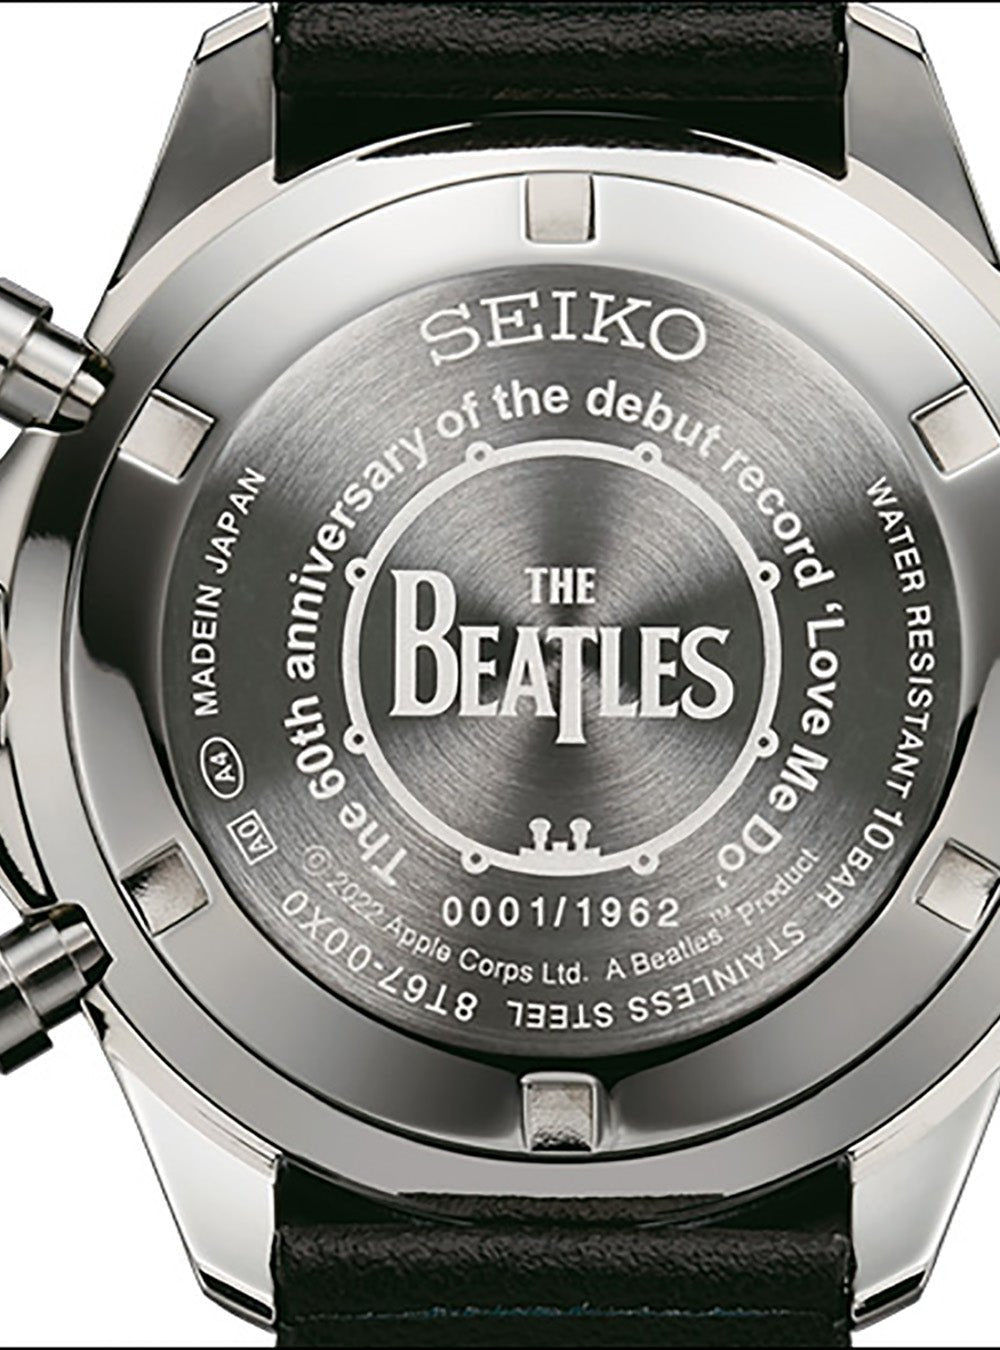 Lounge Loves: The Beatles timepiece | Mint